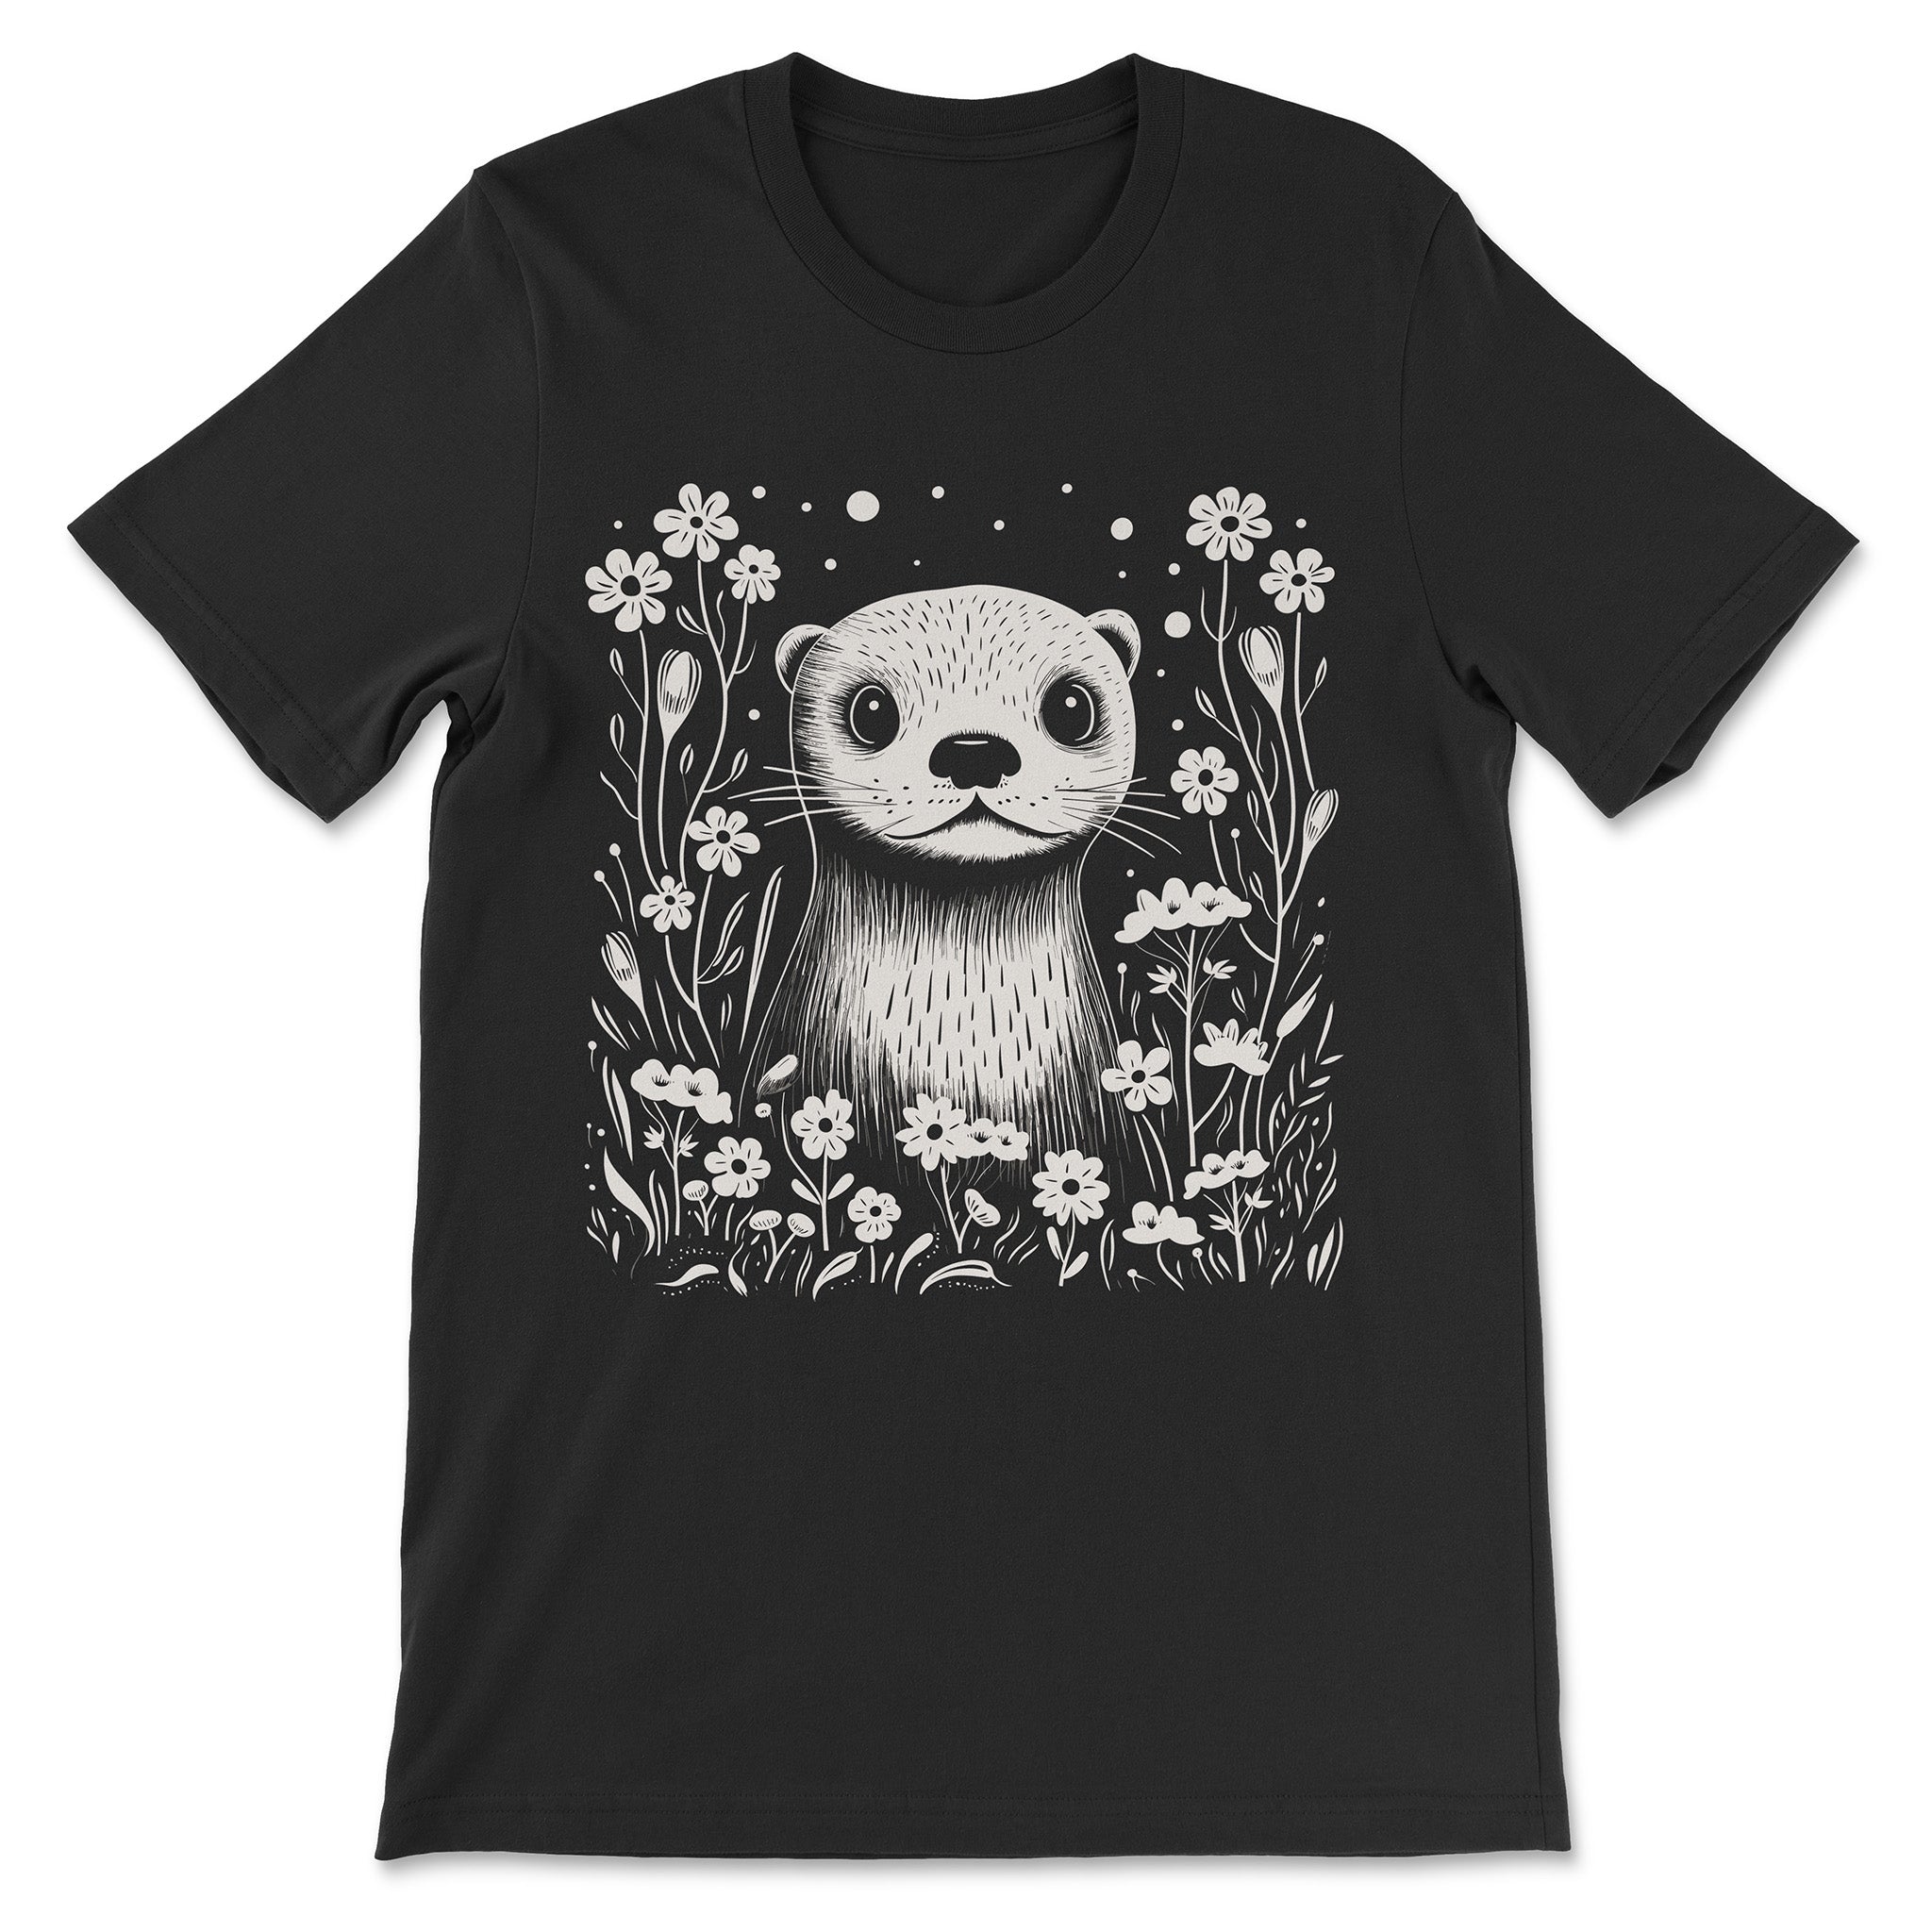 "Simply Otterly" Cute Otter T-Shirt - Hunky Tops